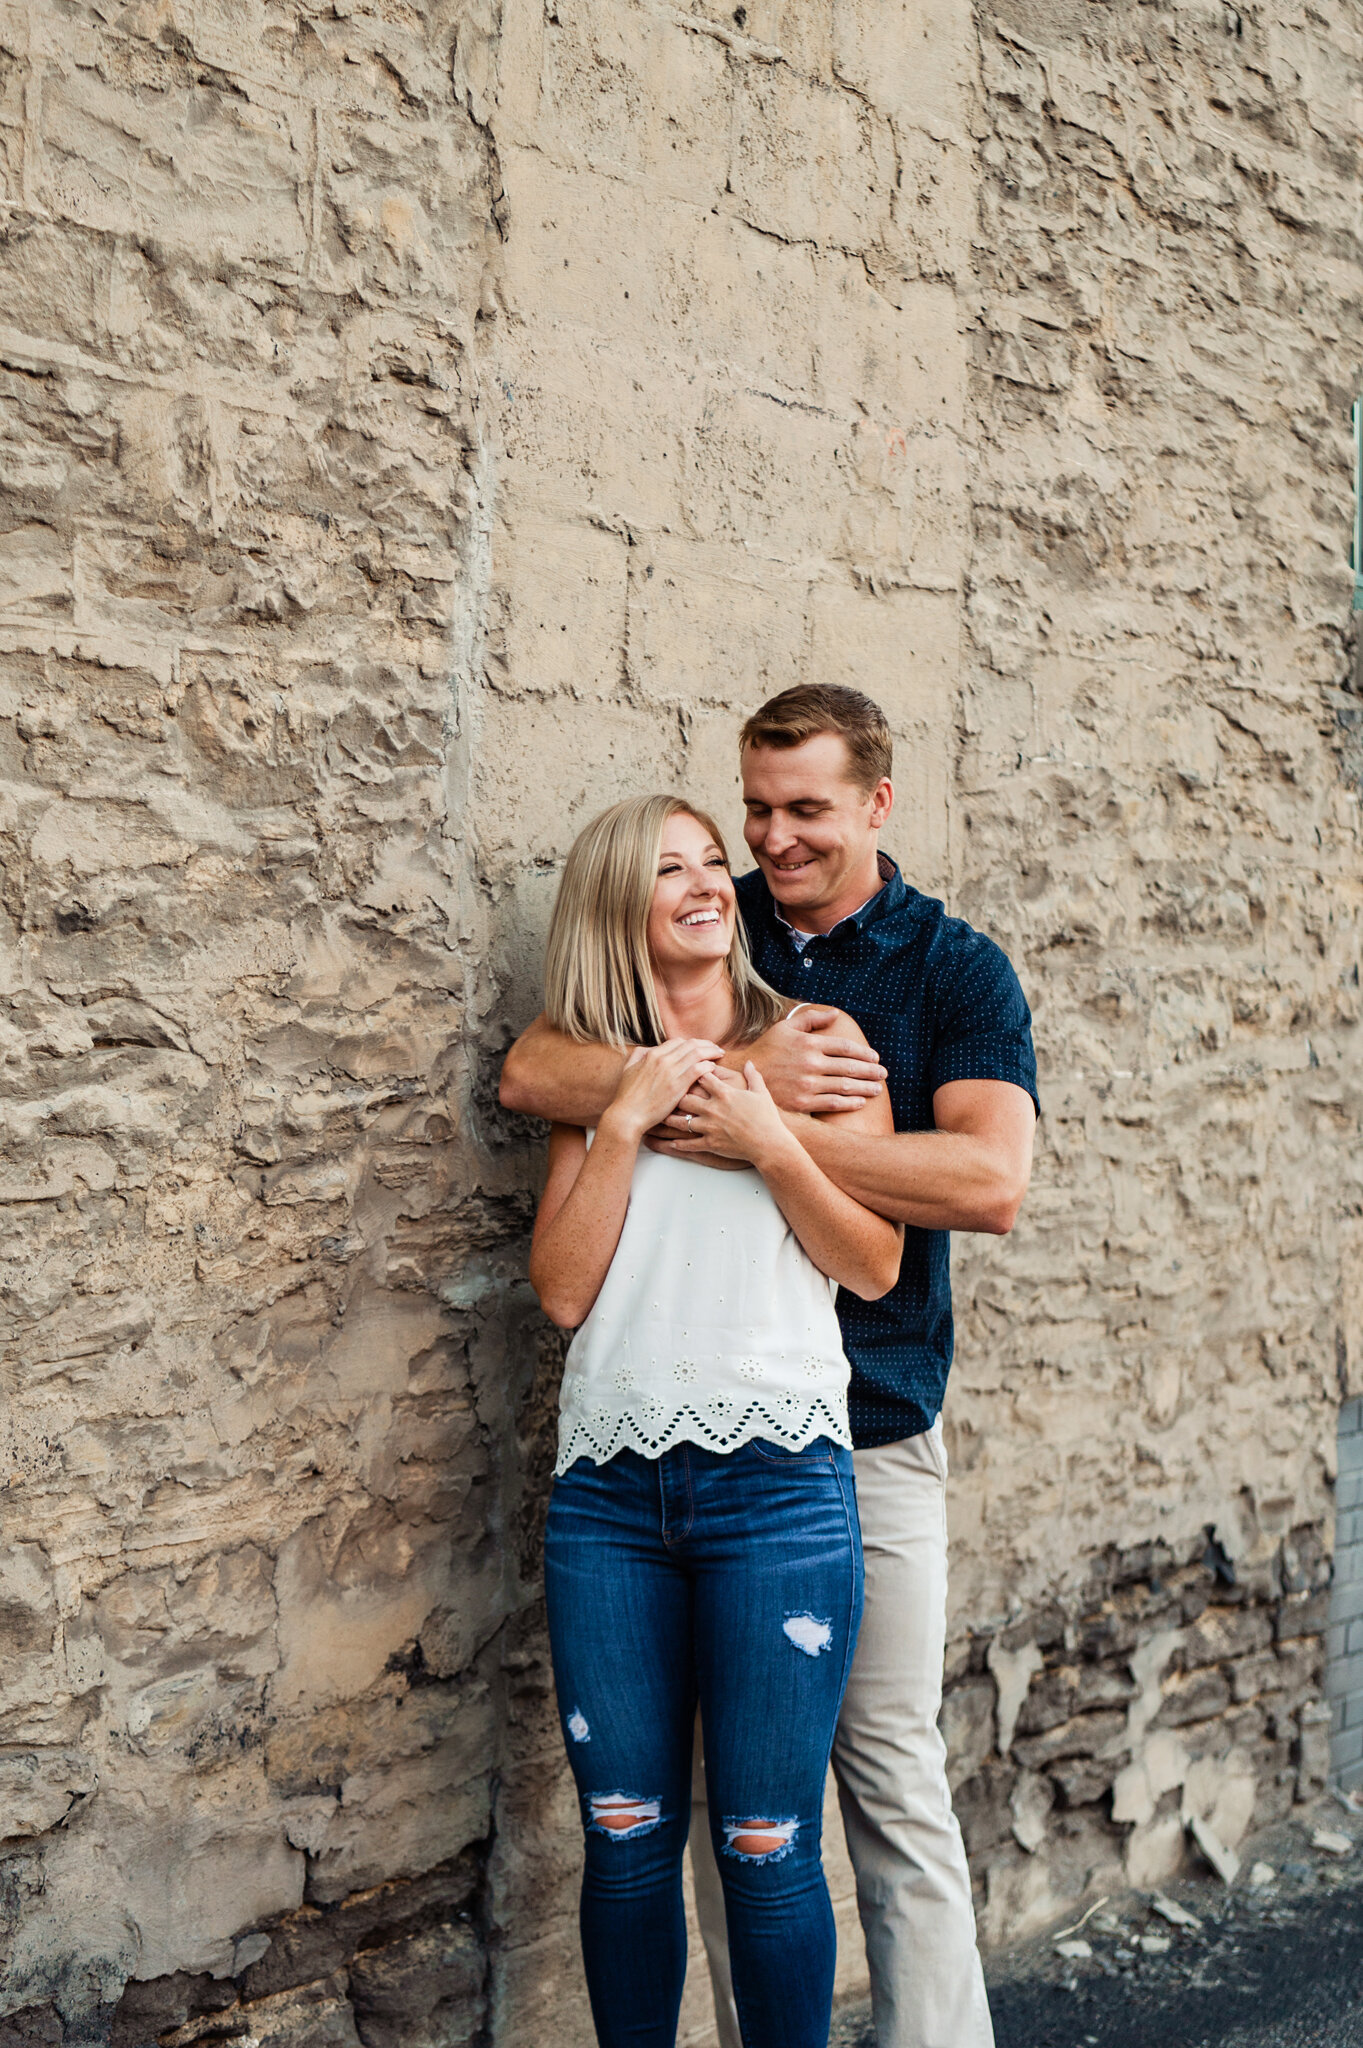 Genesee_Brew_House_High_Falls_Rochester_Engagement_Session_JILL_STUDIO_Rochester_NY_Photographer_5561.jpg